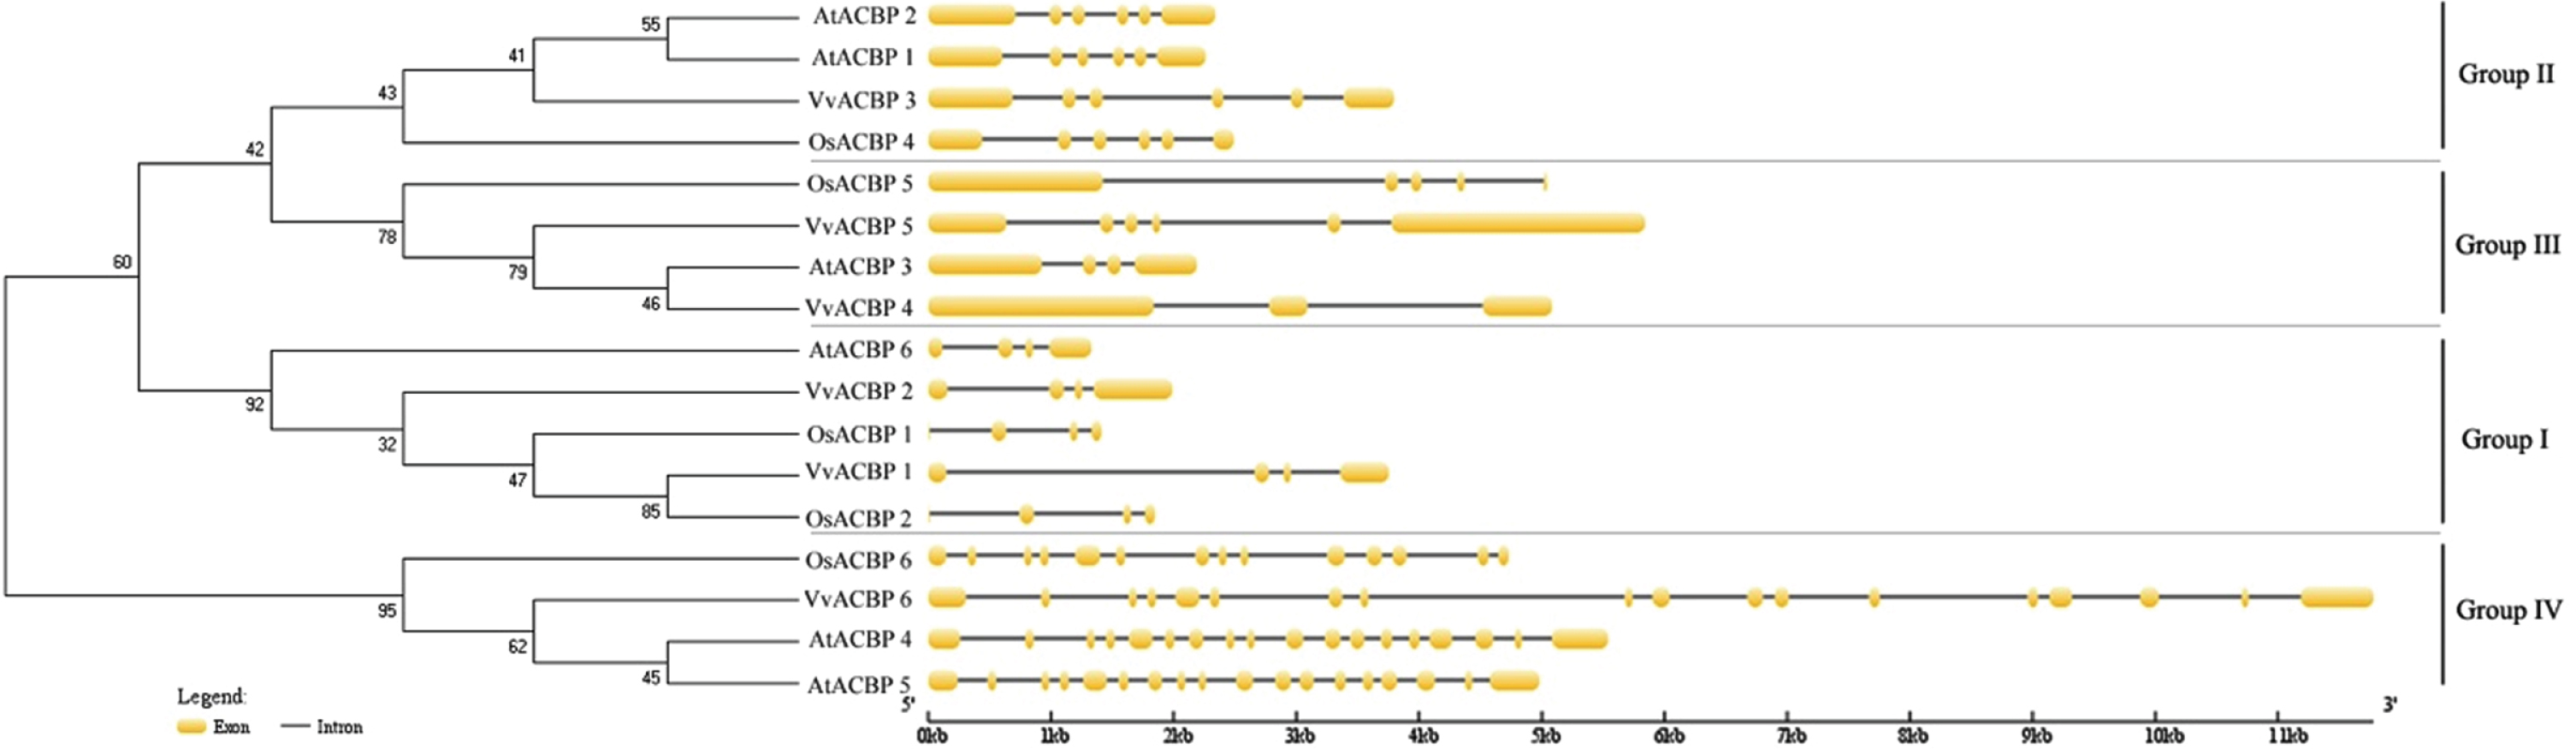 Phylogenetic analysis and exon-intron structures of VvACBP, AtACBP and OsACBP genes. Numbers above or below branches in the tree indicate bootstrap values. Exons and introns are indicated by yellow boxes and black horizontal lines, respectively.